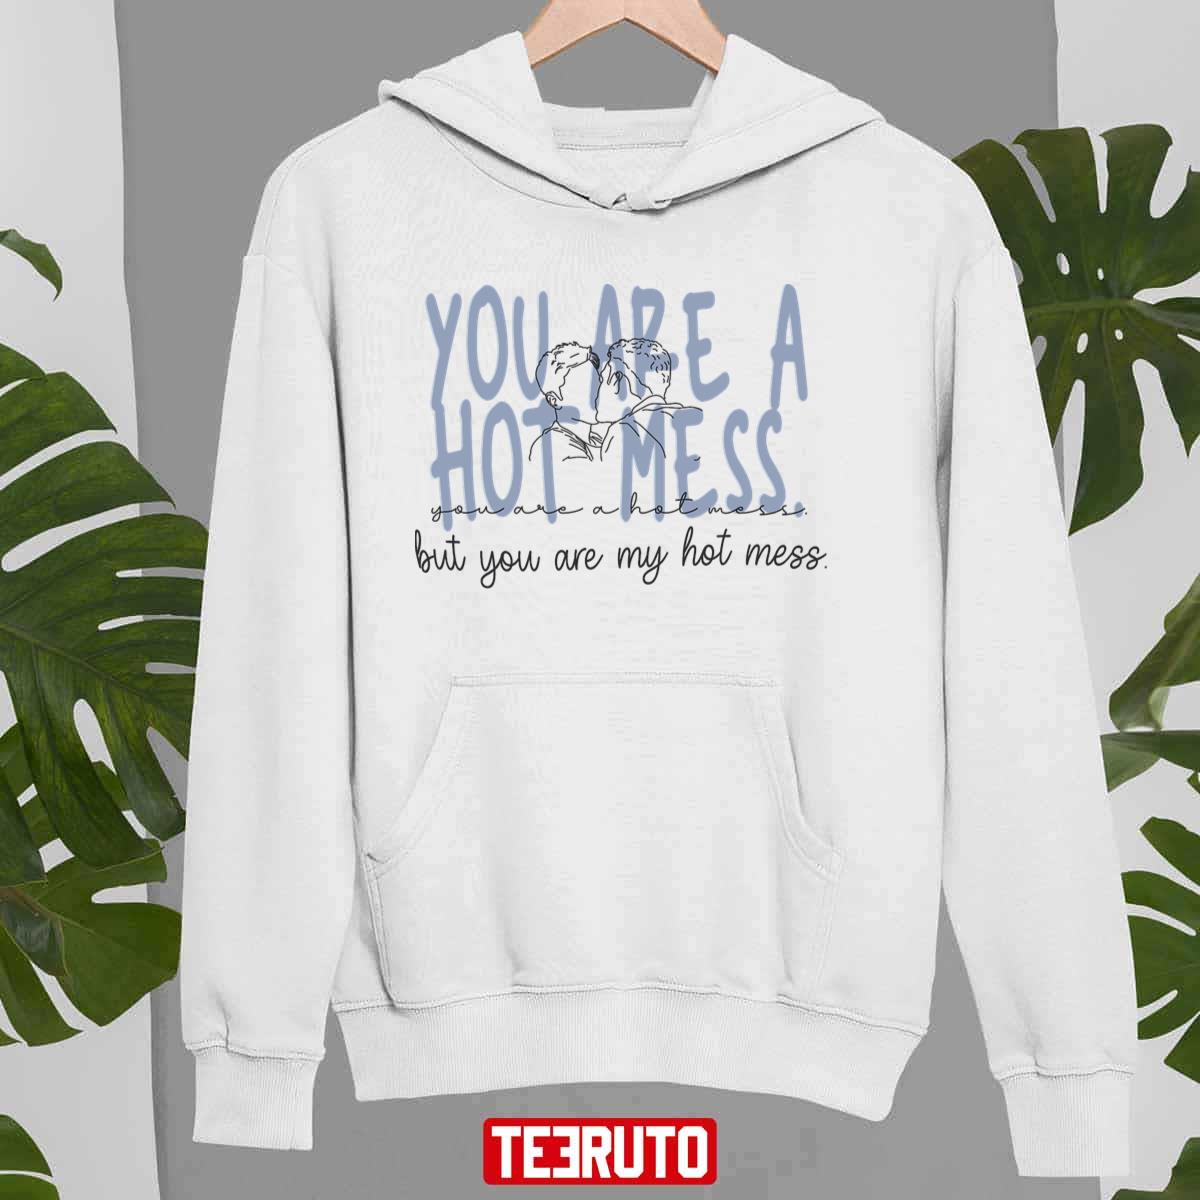 You Are A Hot Mess But You Are My Hot Mess 911 Lone Star Unisex T-Shirt